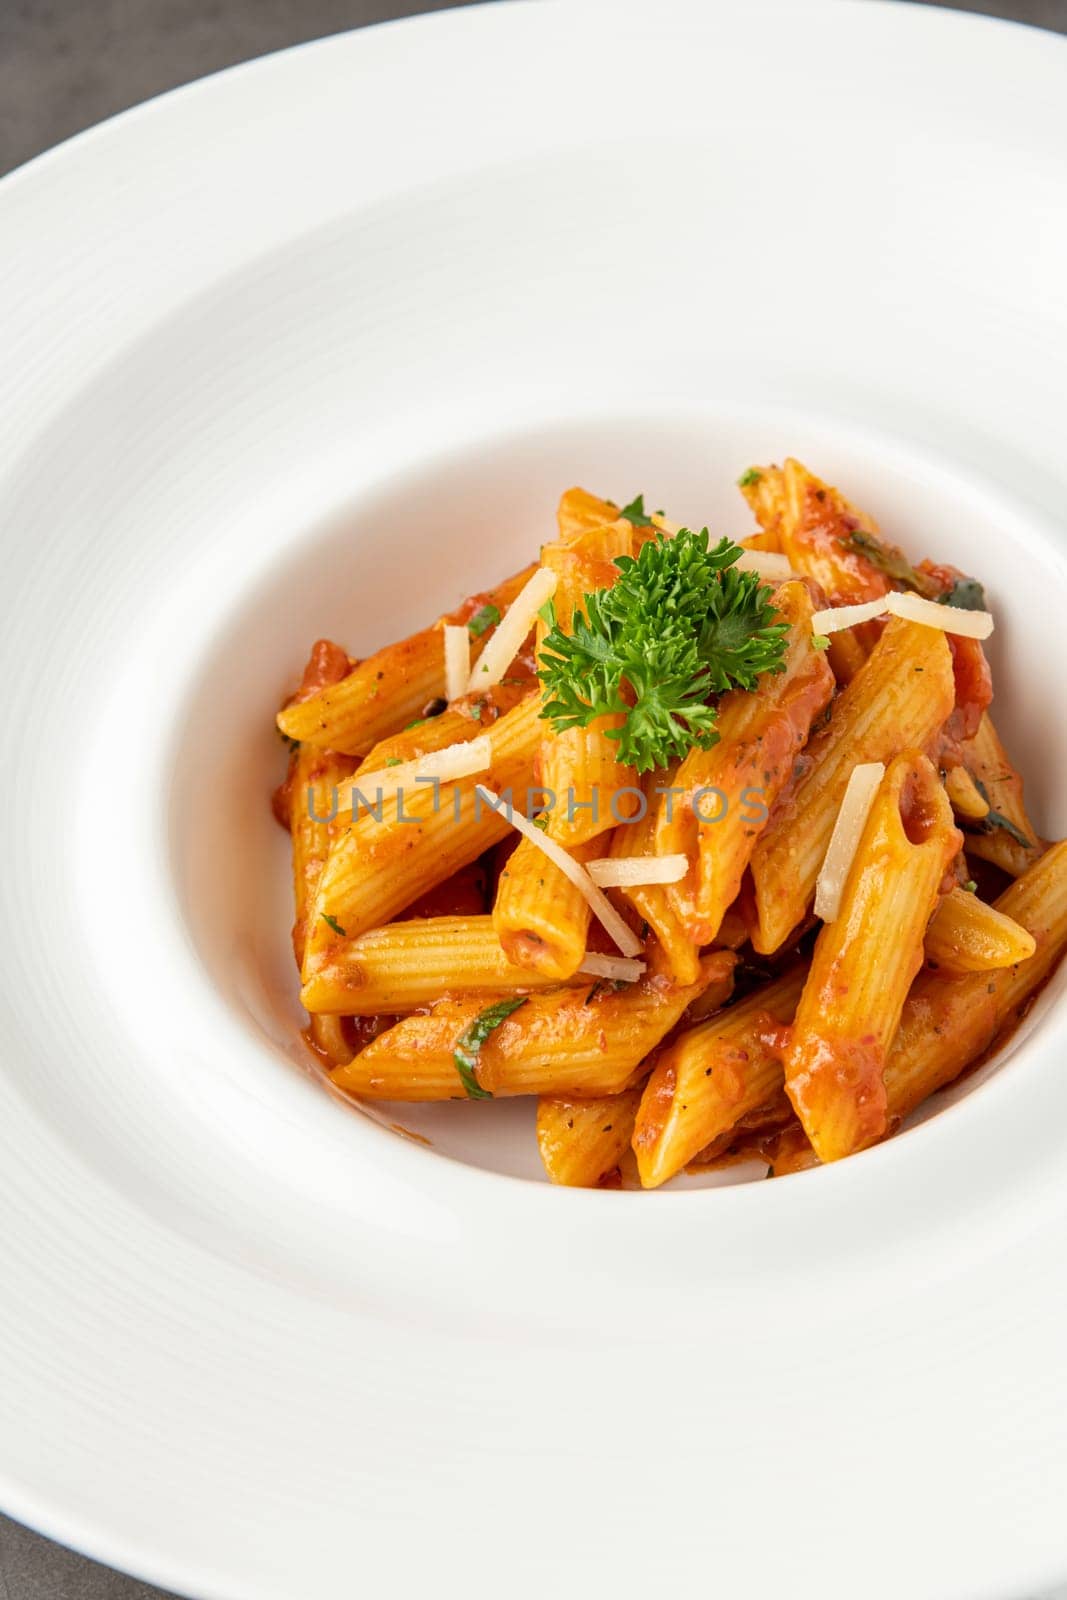 Penne pasta in tomato sauce, tomatoes decorated with parsley on a wooden background by Sonat